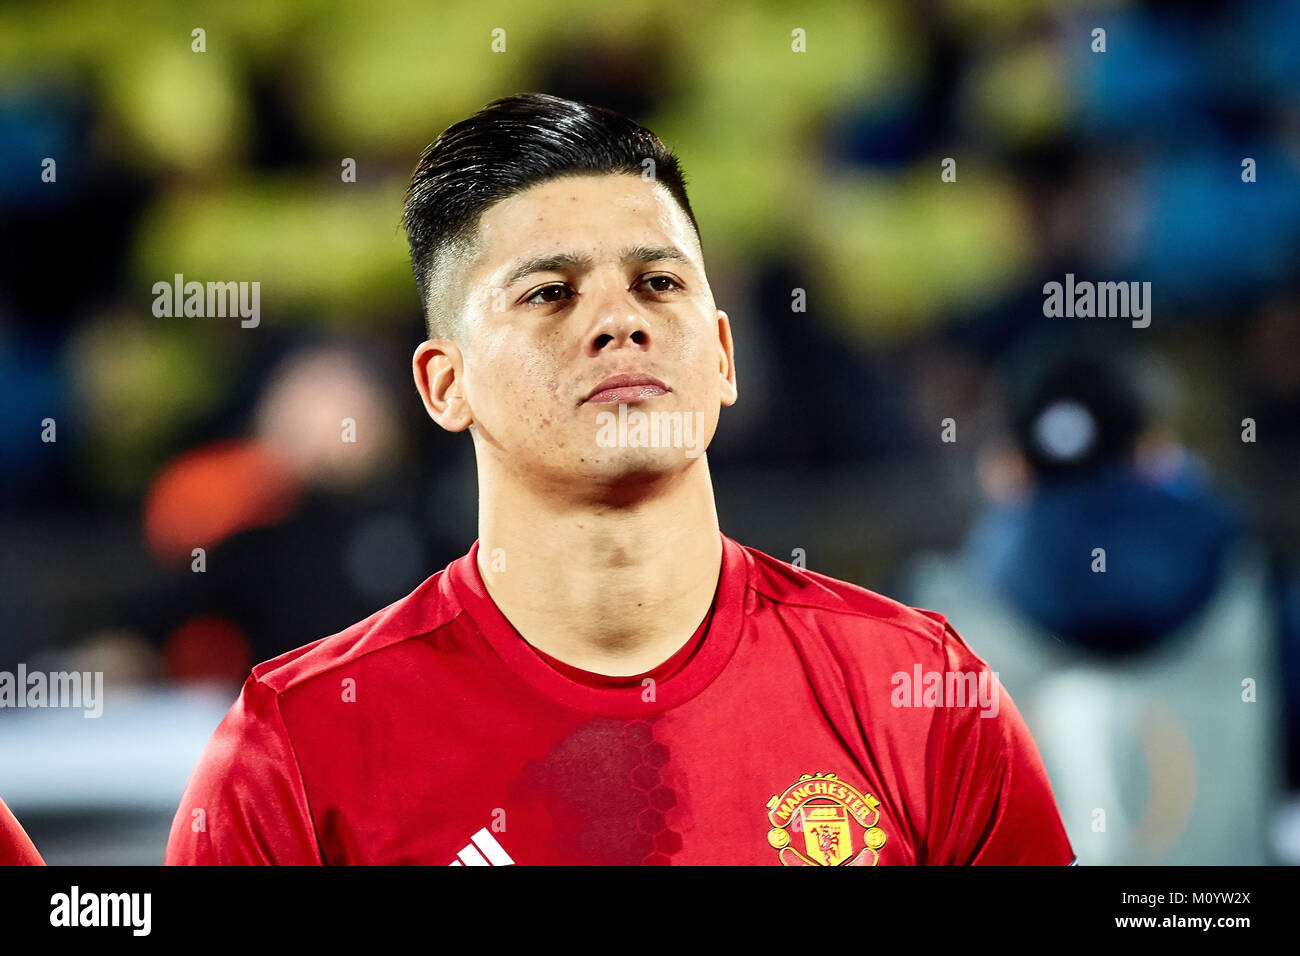 Marcos Rojo in match 1/8 finals of the Europa League between FC 'Rostov' and 'Manchester United', 09 March 2017 in Rostov-on-Don, Russia. Stock Photo